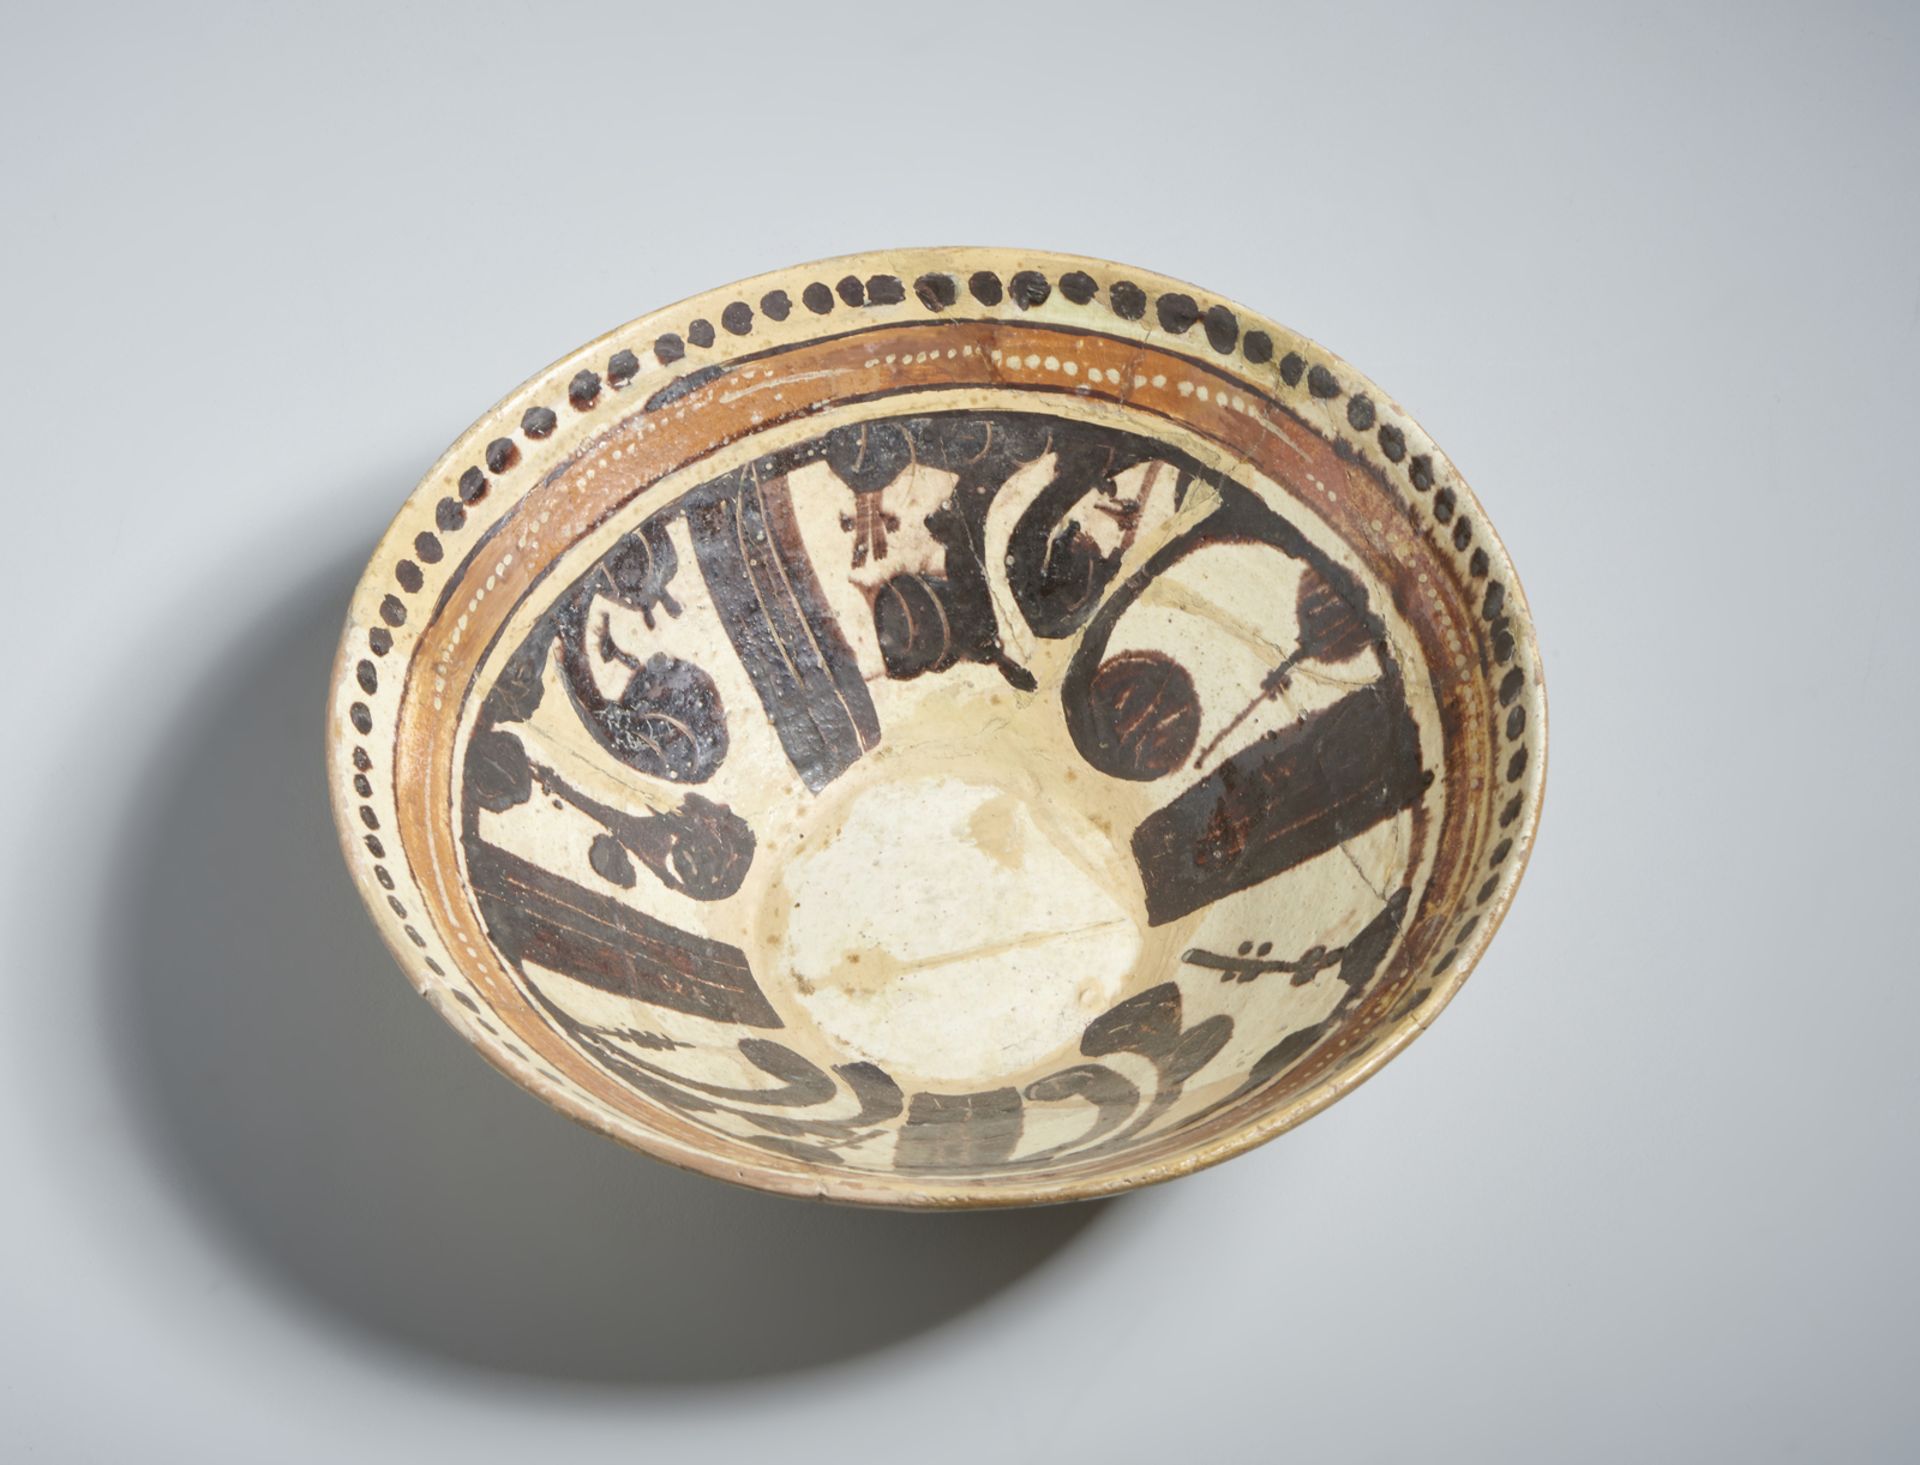 A terracotta slip painted calligraphic bowl Samanid Eastern Persia, 10th century Restored. Cm 22, - Image 2 of 3